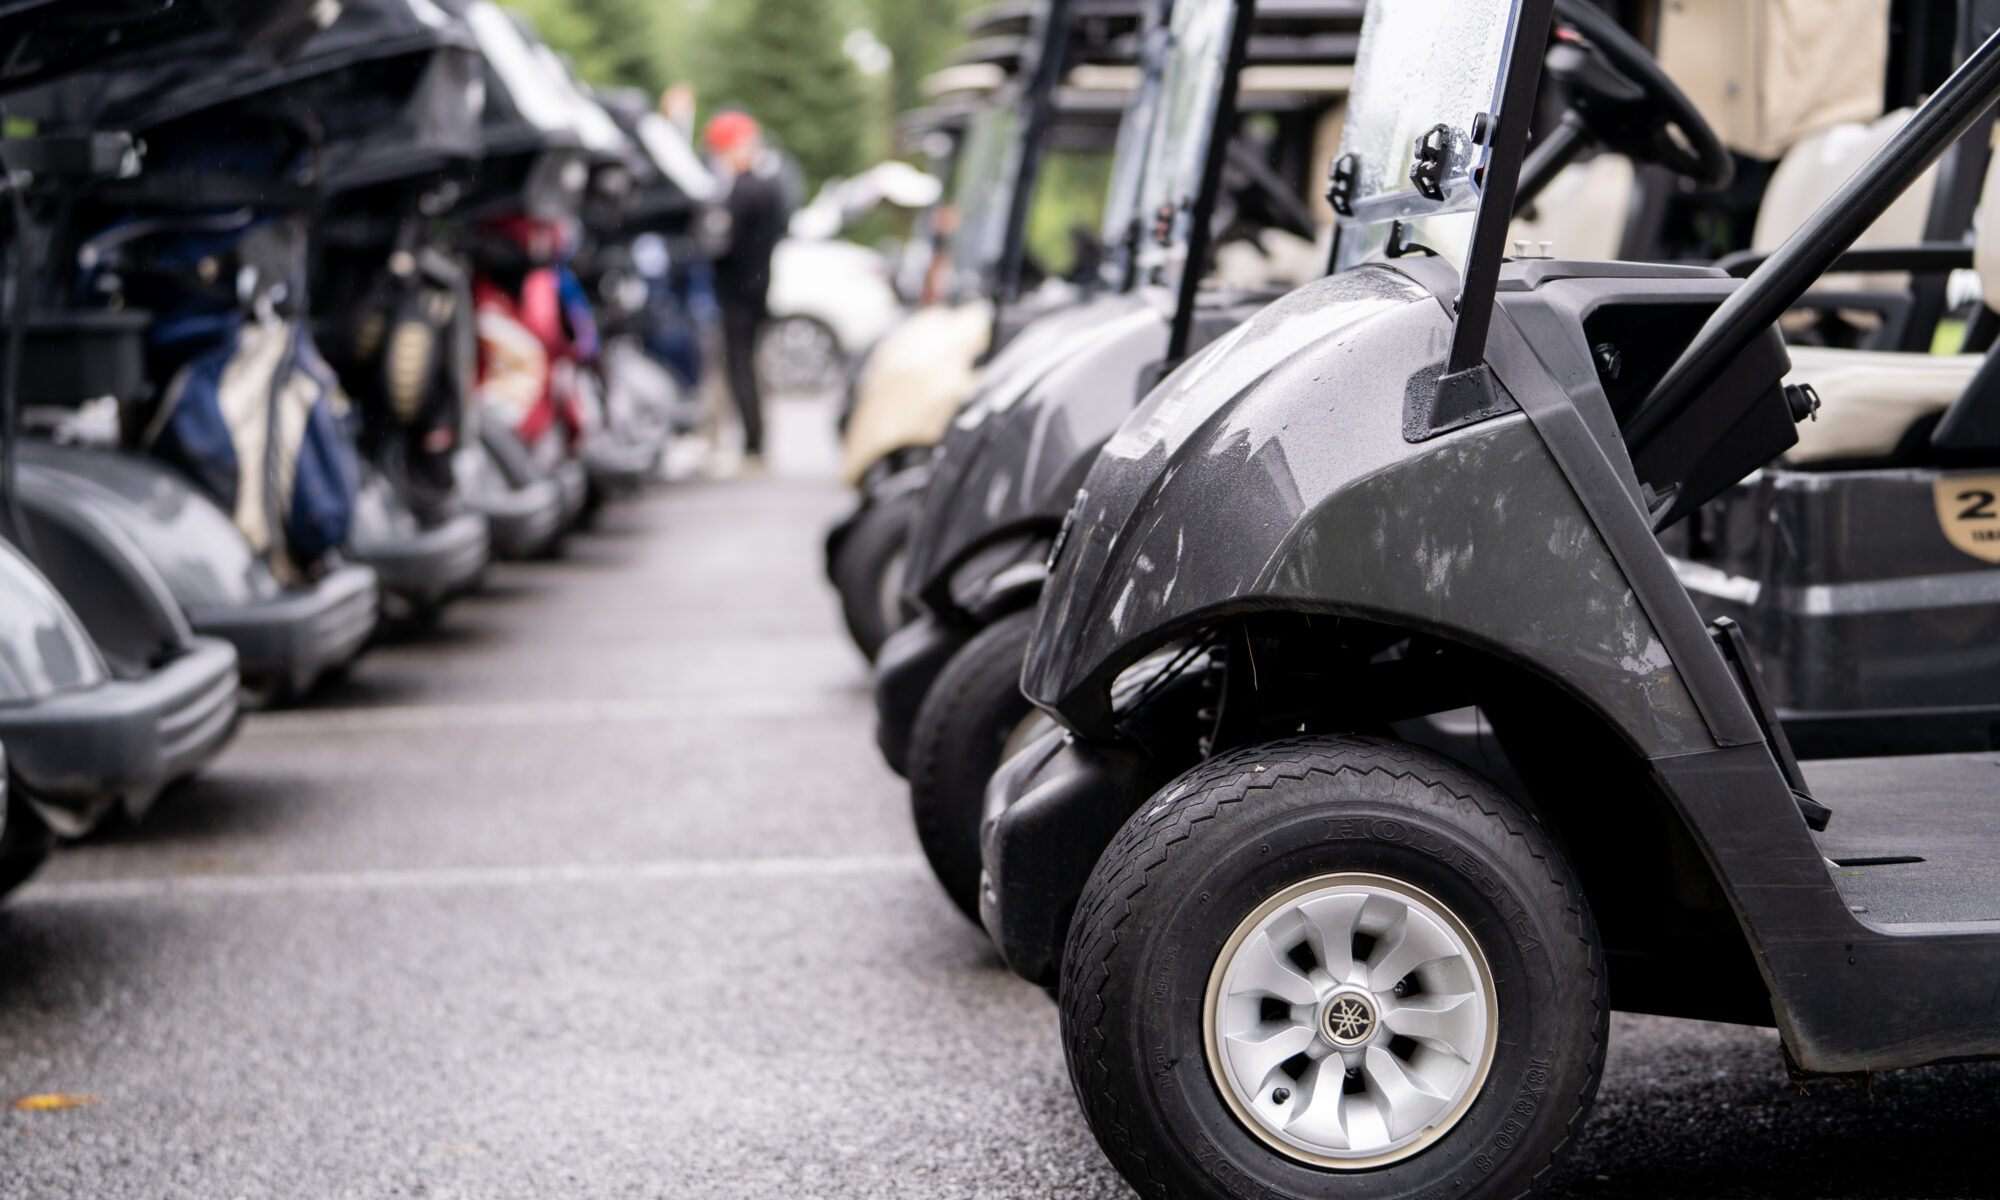 Golf carts parked in line